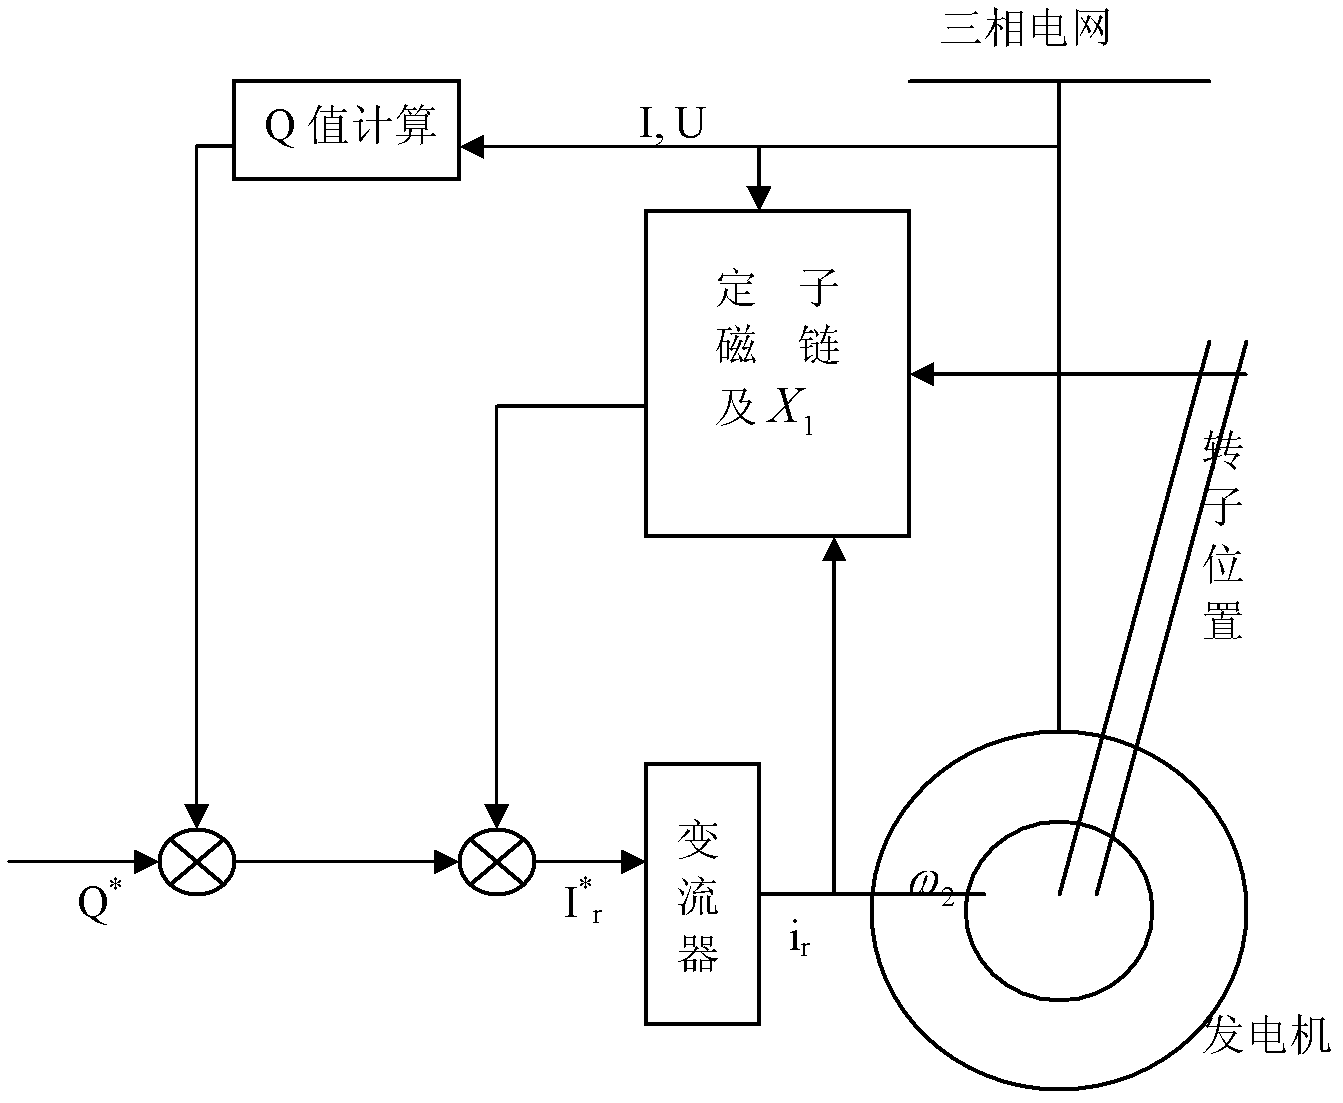 Control method of reactive power of doubly fed wind power generator